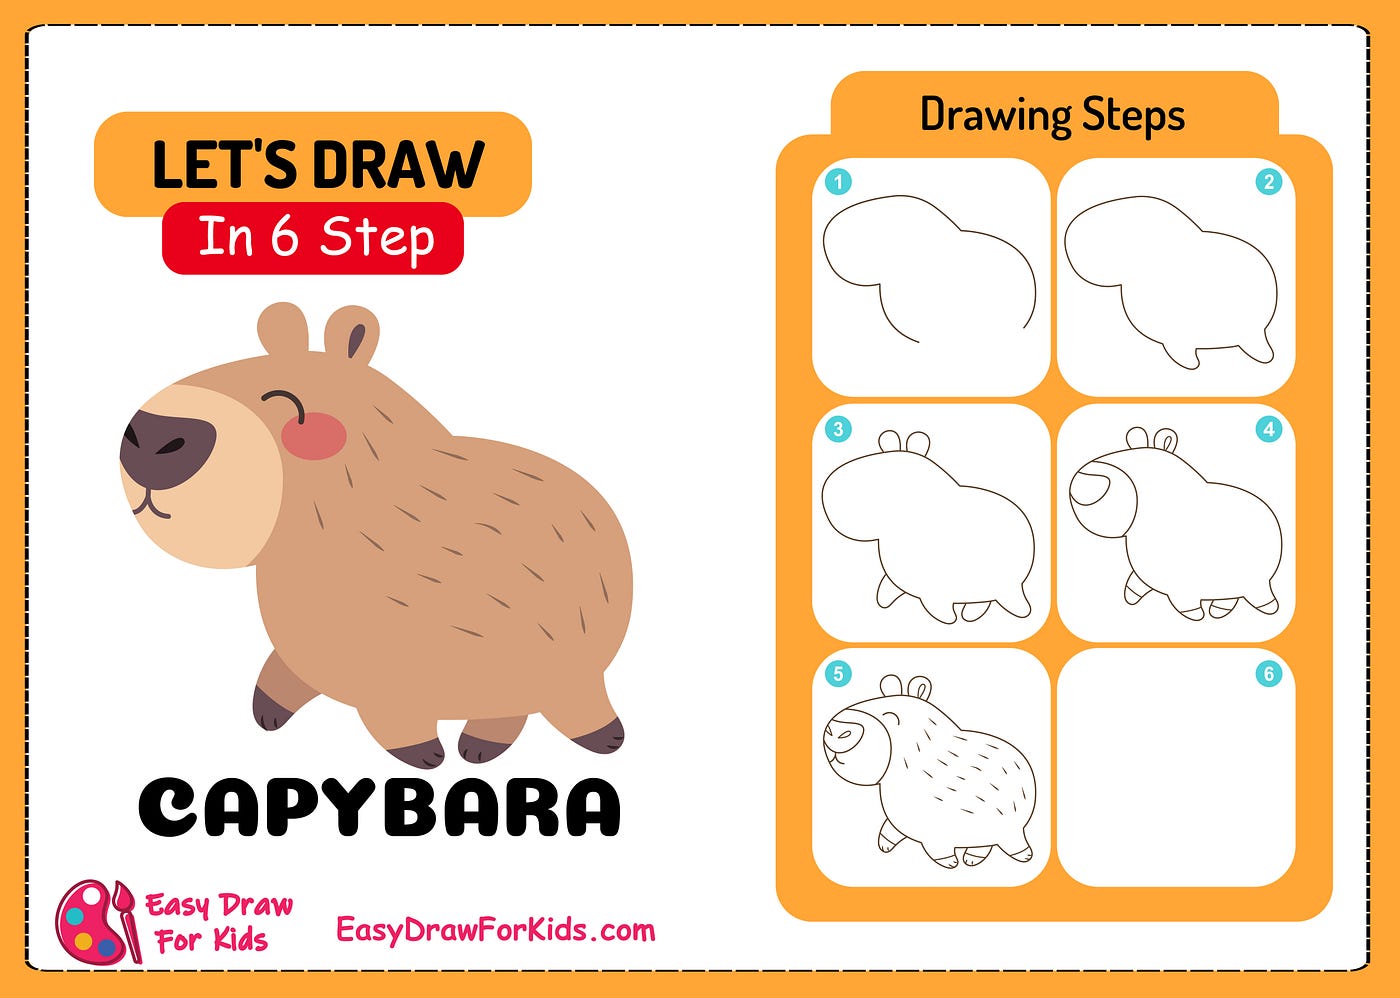 How to Draw a Capybara: A Step-by-Step Guide, by Han Sumi